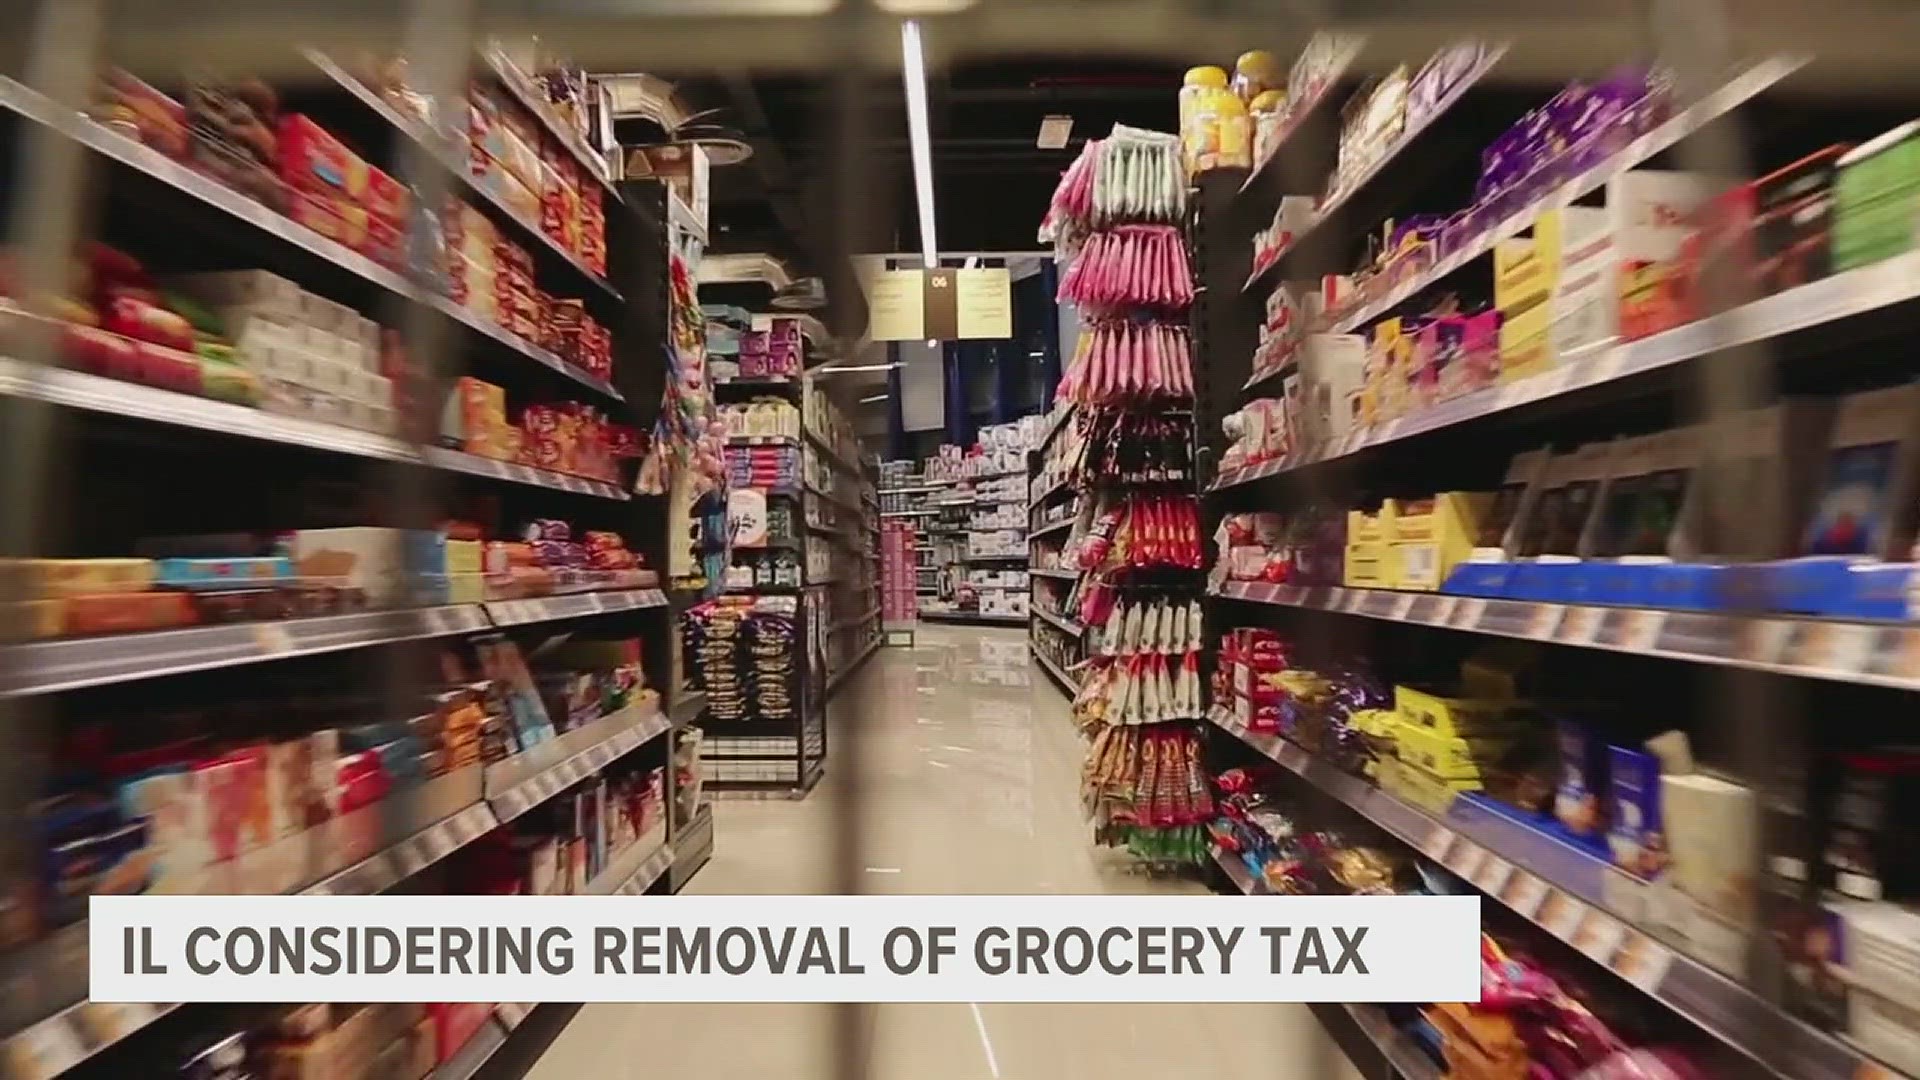 The proposal to remove the 1% grocery tax was made during the governor's budget address in February.